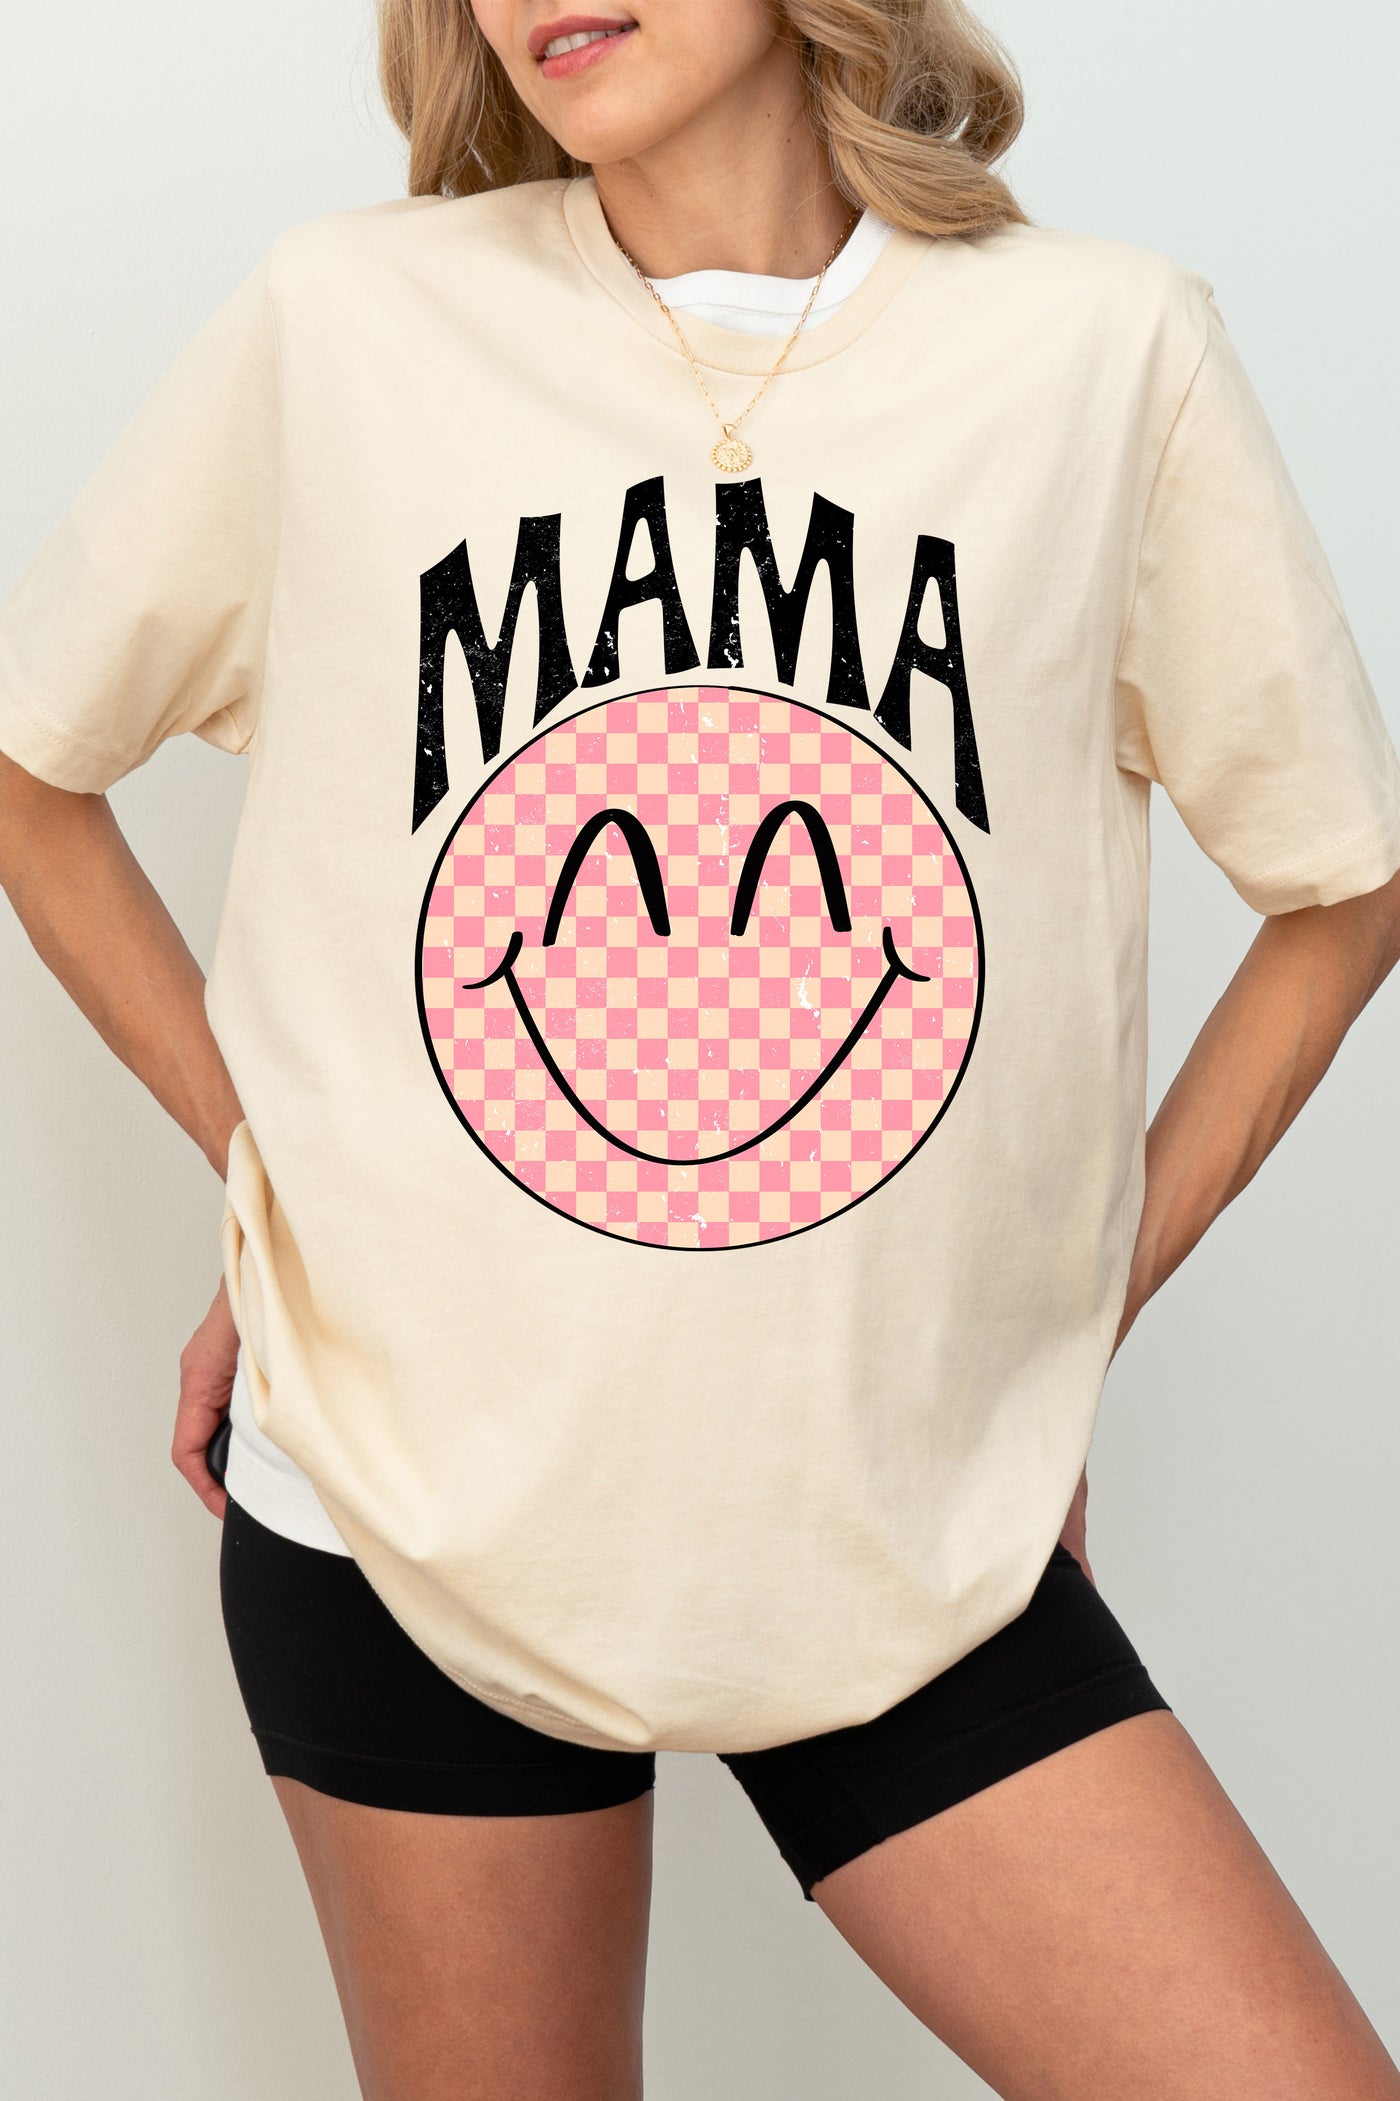 MAMA SMILEY FACE - BLUE + PINK